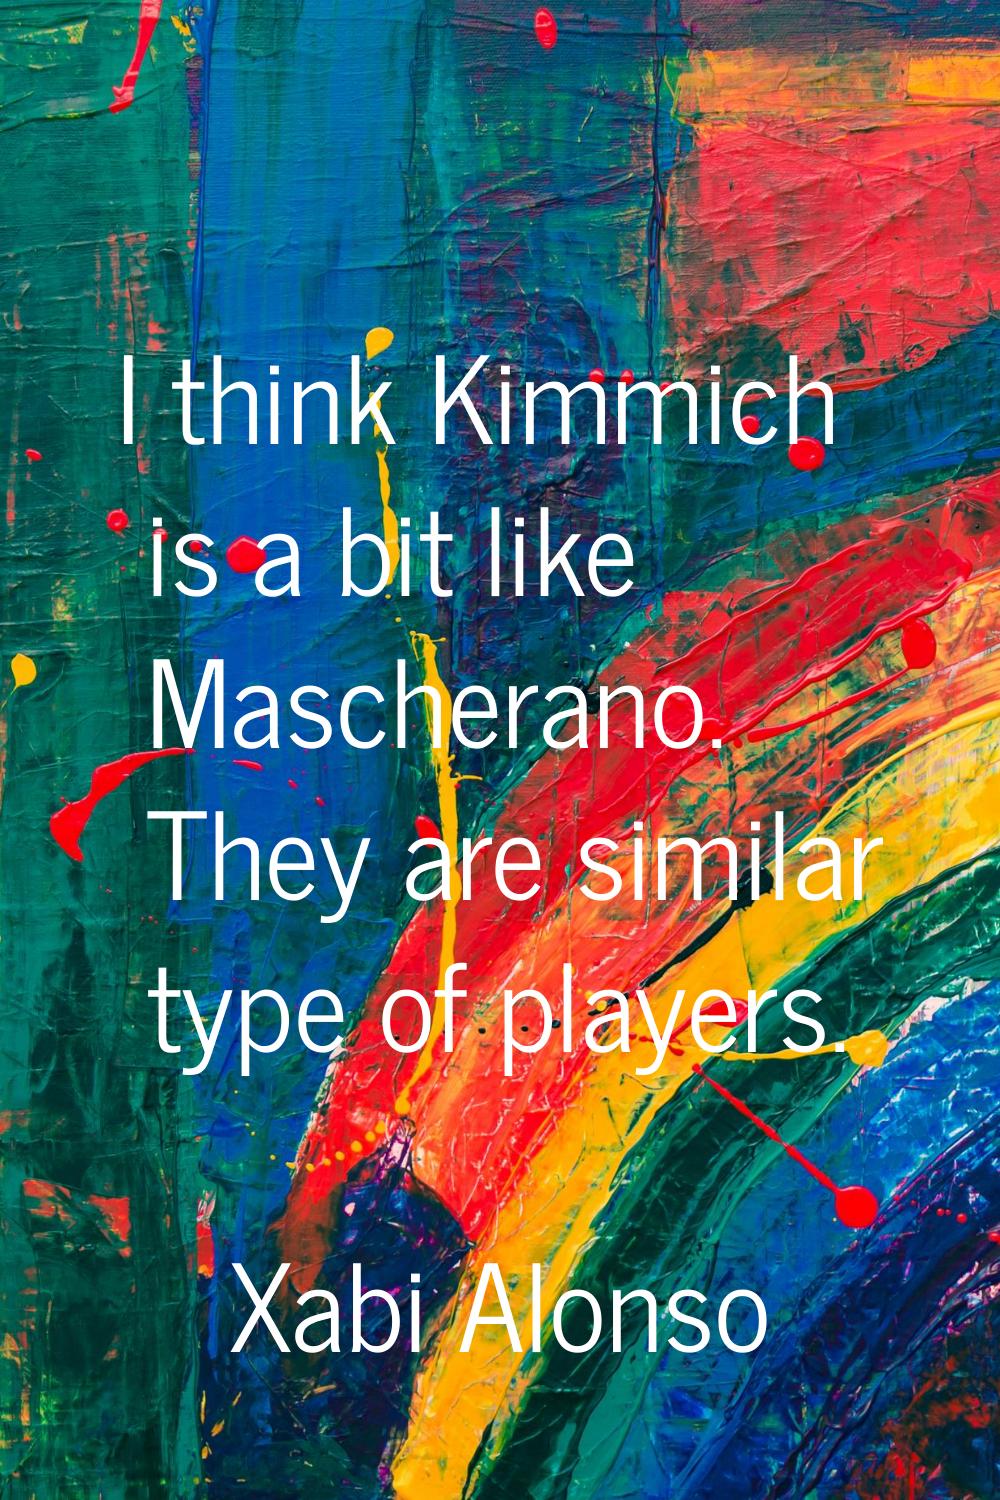 I think Kimmich is a bit like Mascherano. They are similar type of players.